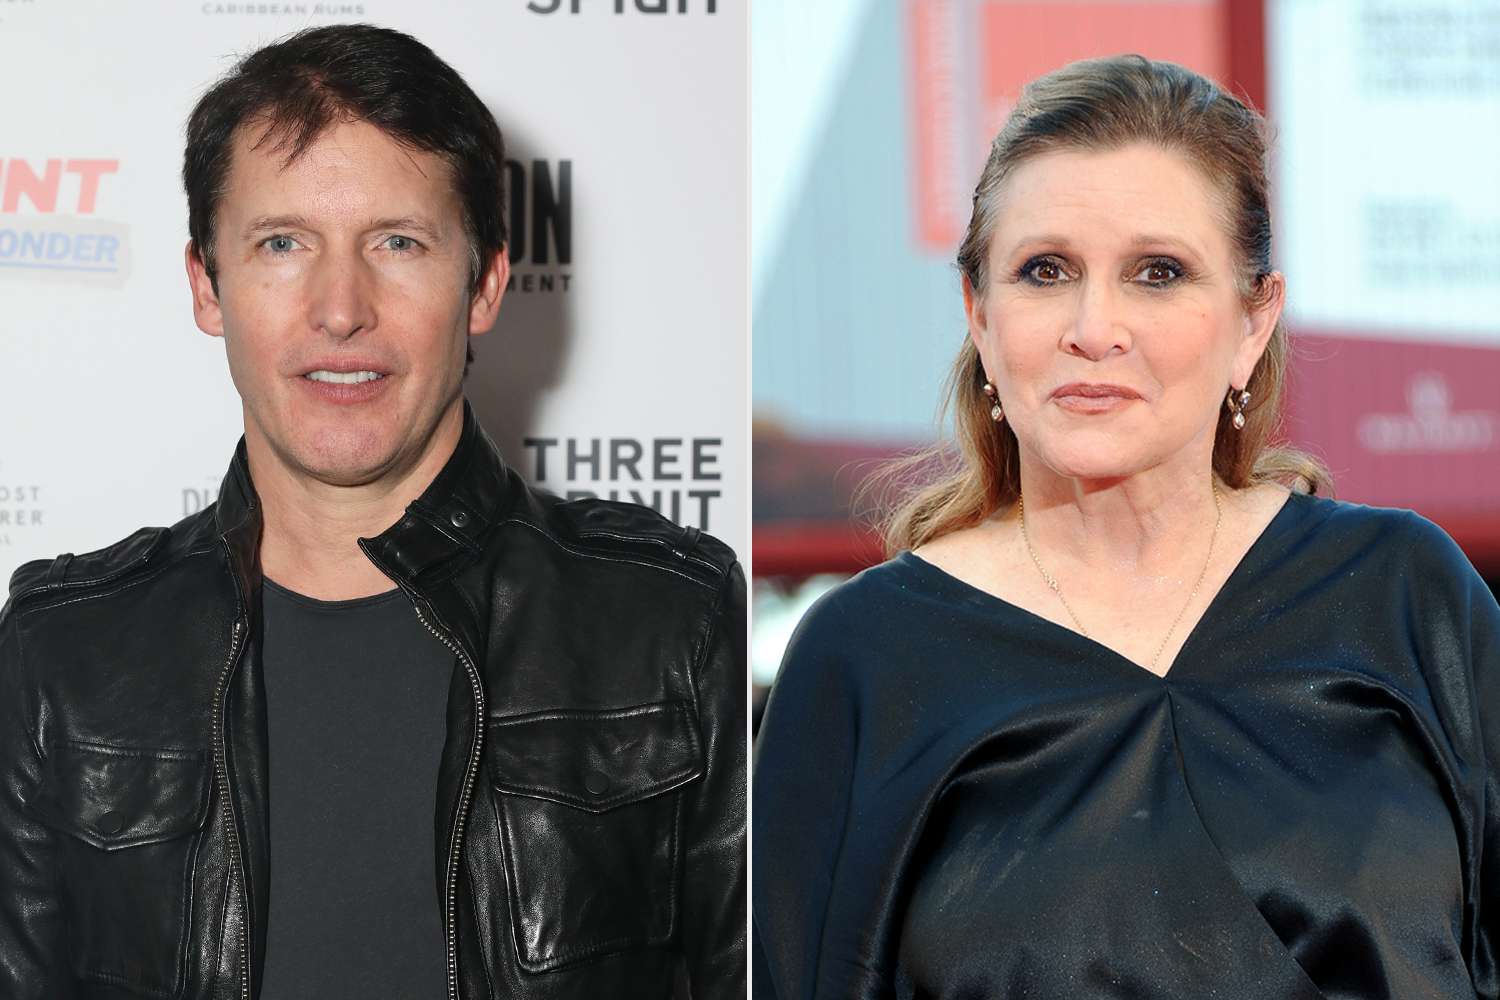 ... 'Pressure to Be Thin' for “Star Wars” Before Her Death, Says James Blunt: She Was 'Mistreating Her Body'